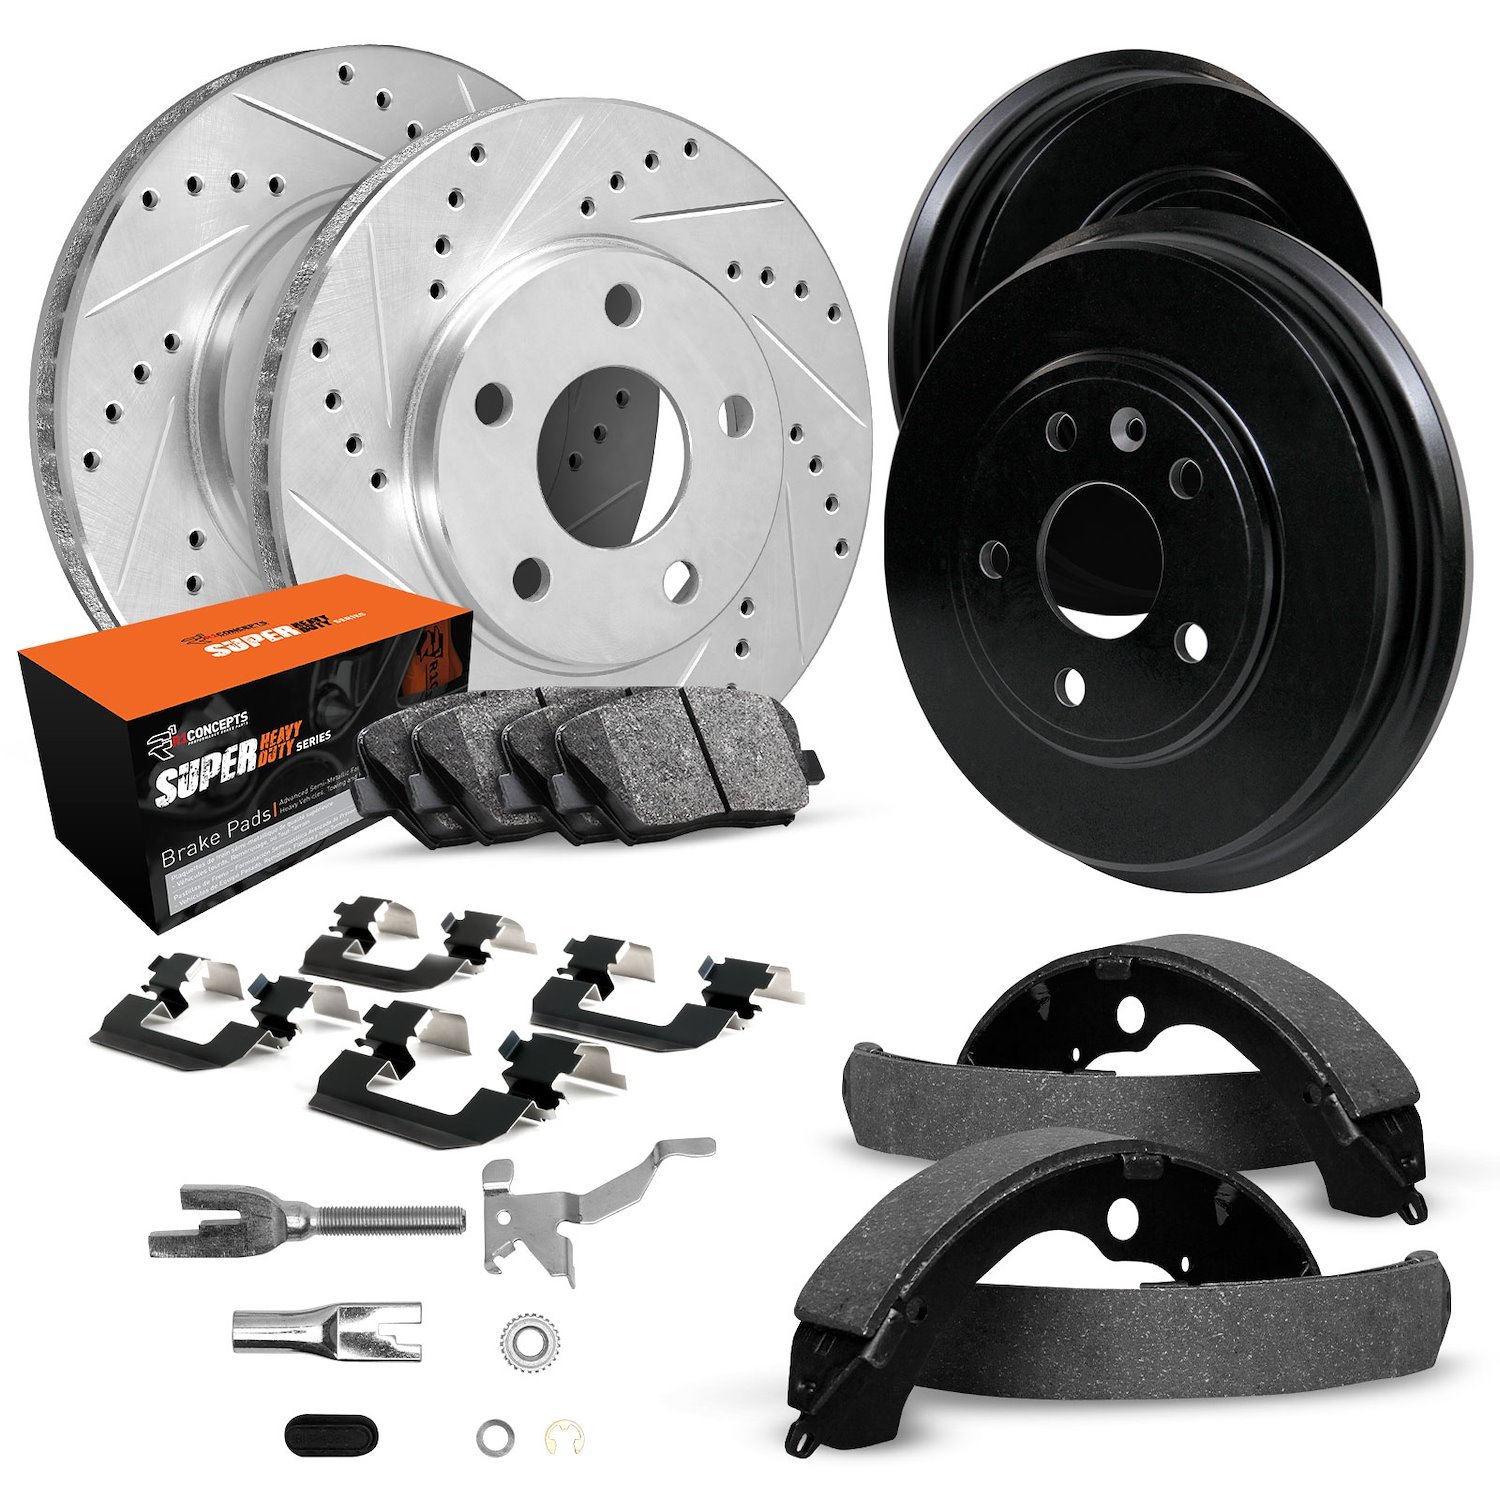 E-Line Drilled/Slotted Silver Rotor & Drum Set w/Super-Duty Pads, Shoes/Hardware/Adjusters, 2000-2000 Mopar